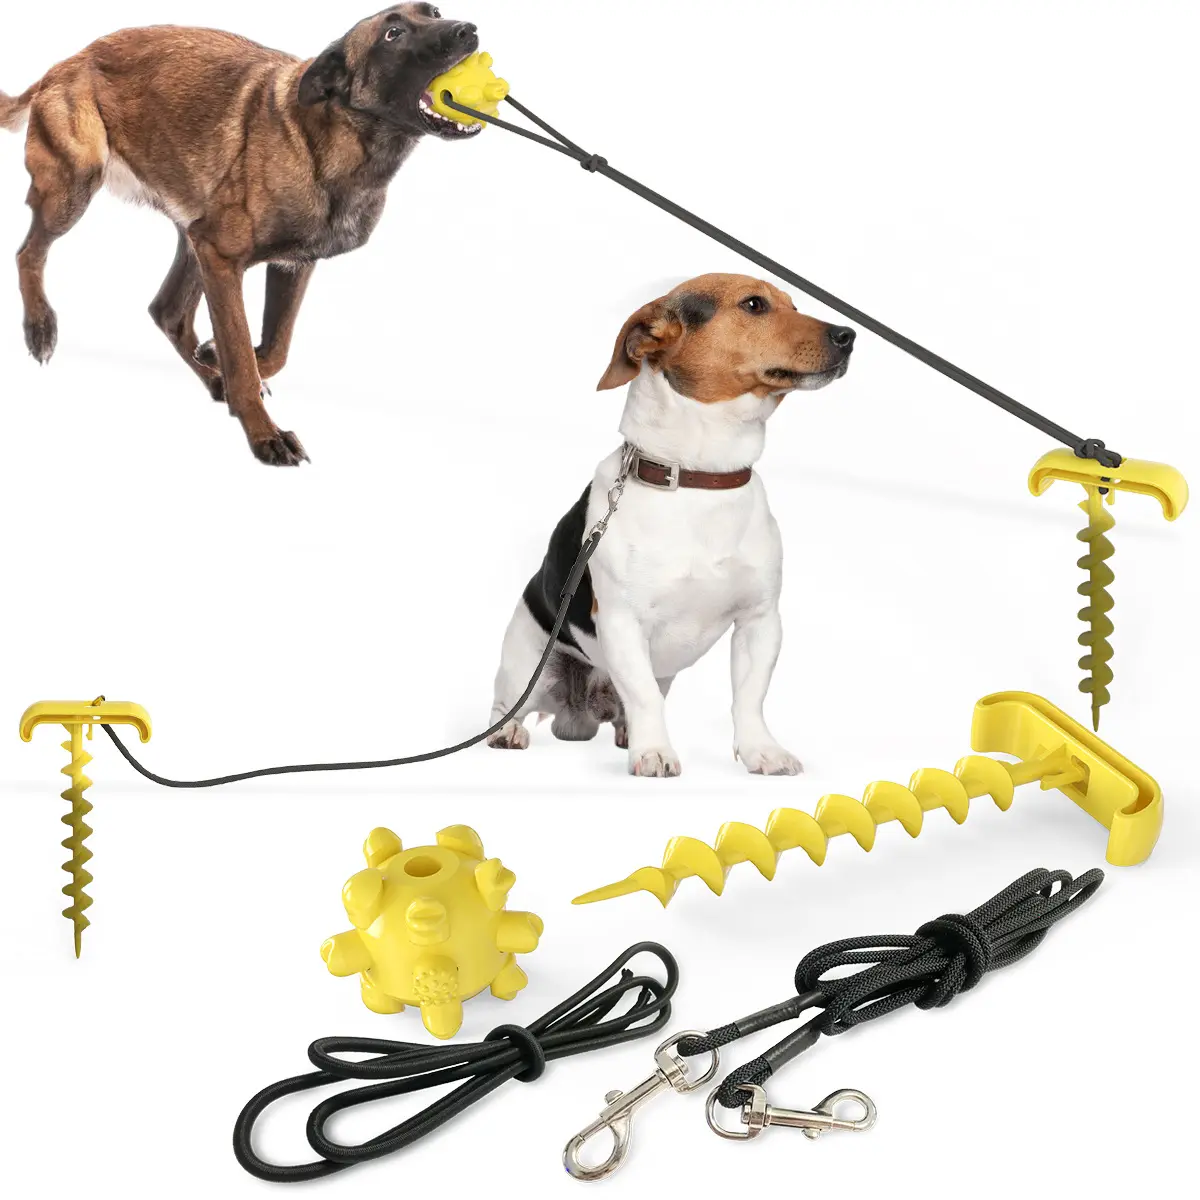 Outdoor Portable Ground fixed Pile Pulling Rope Tie-Out Stake dog toys customized